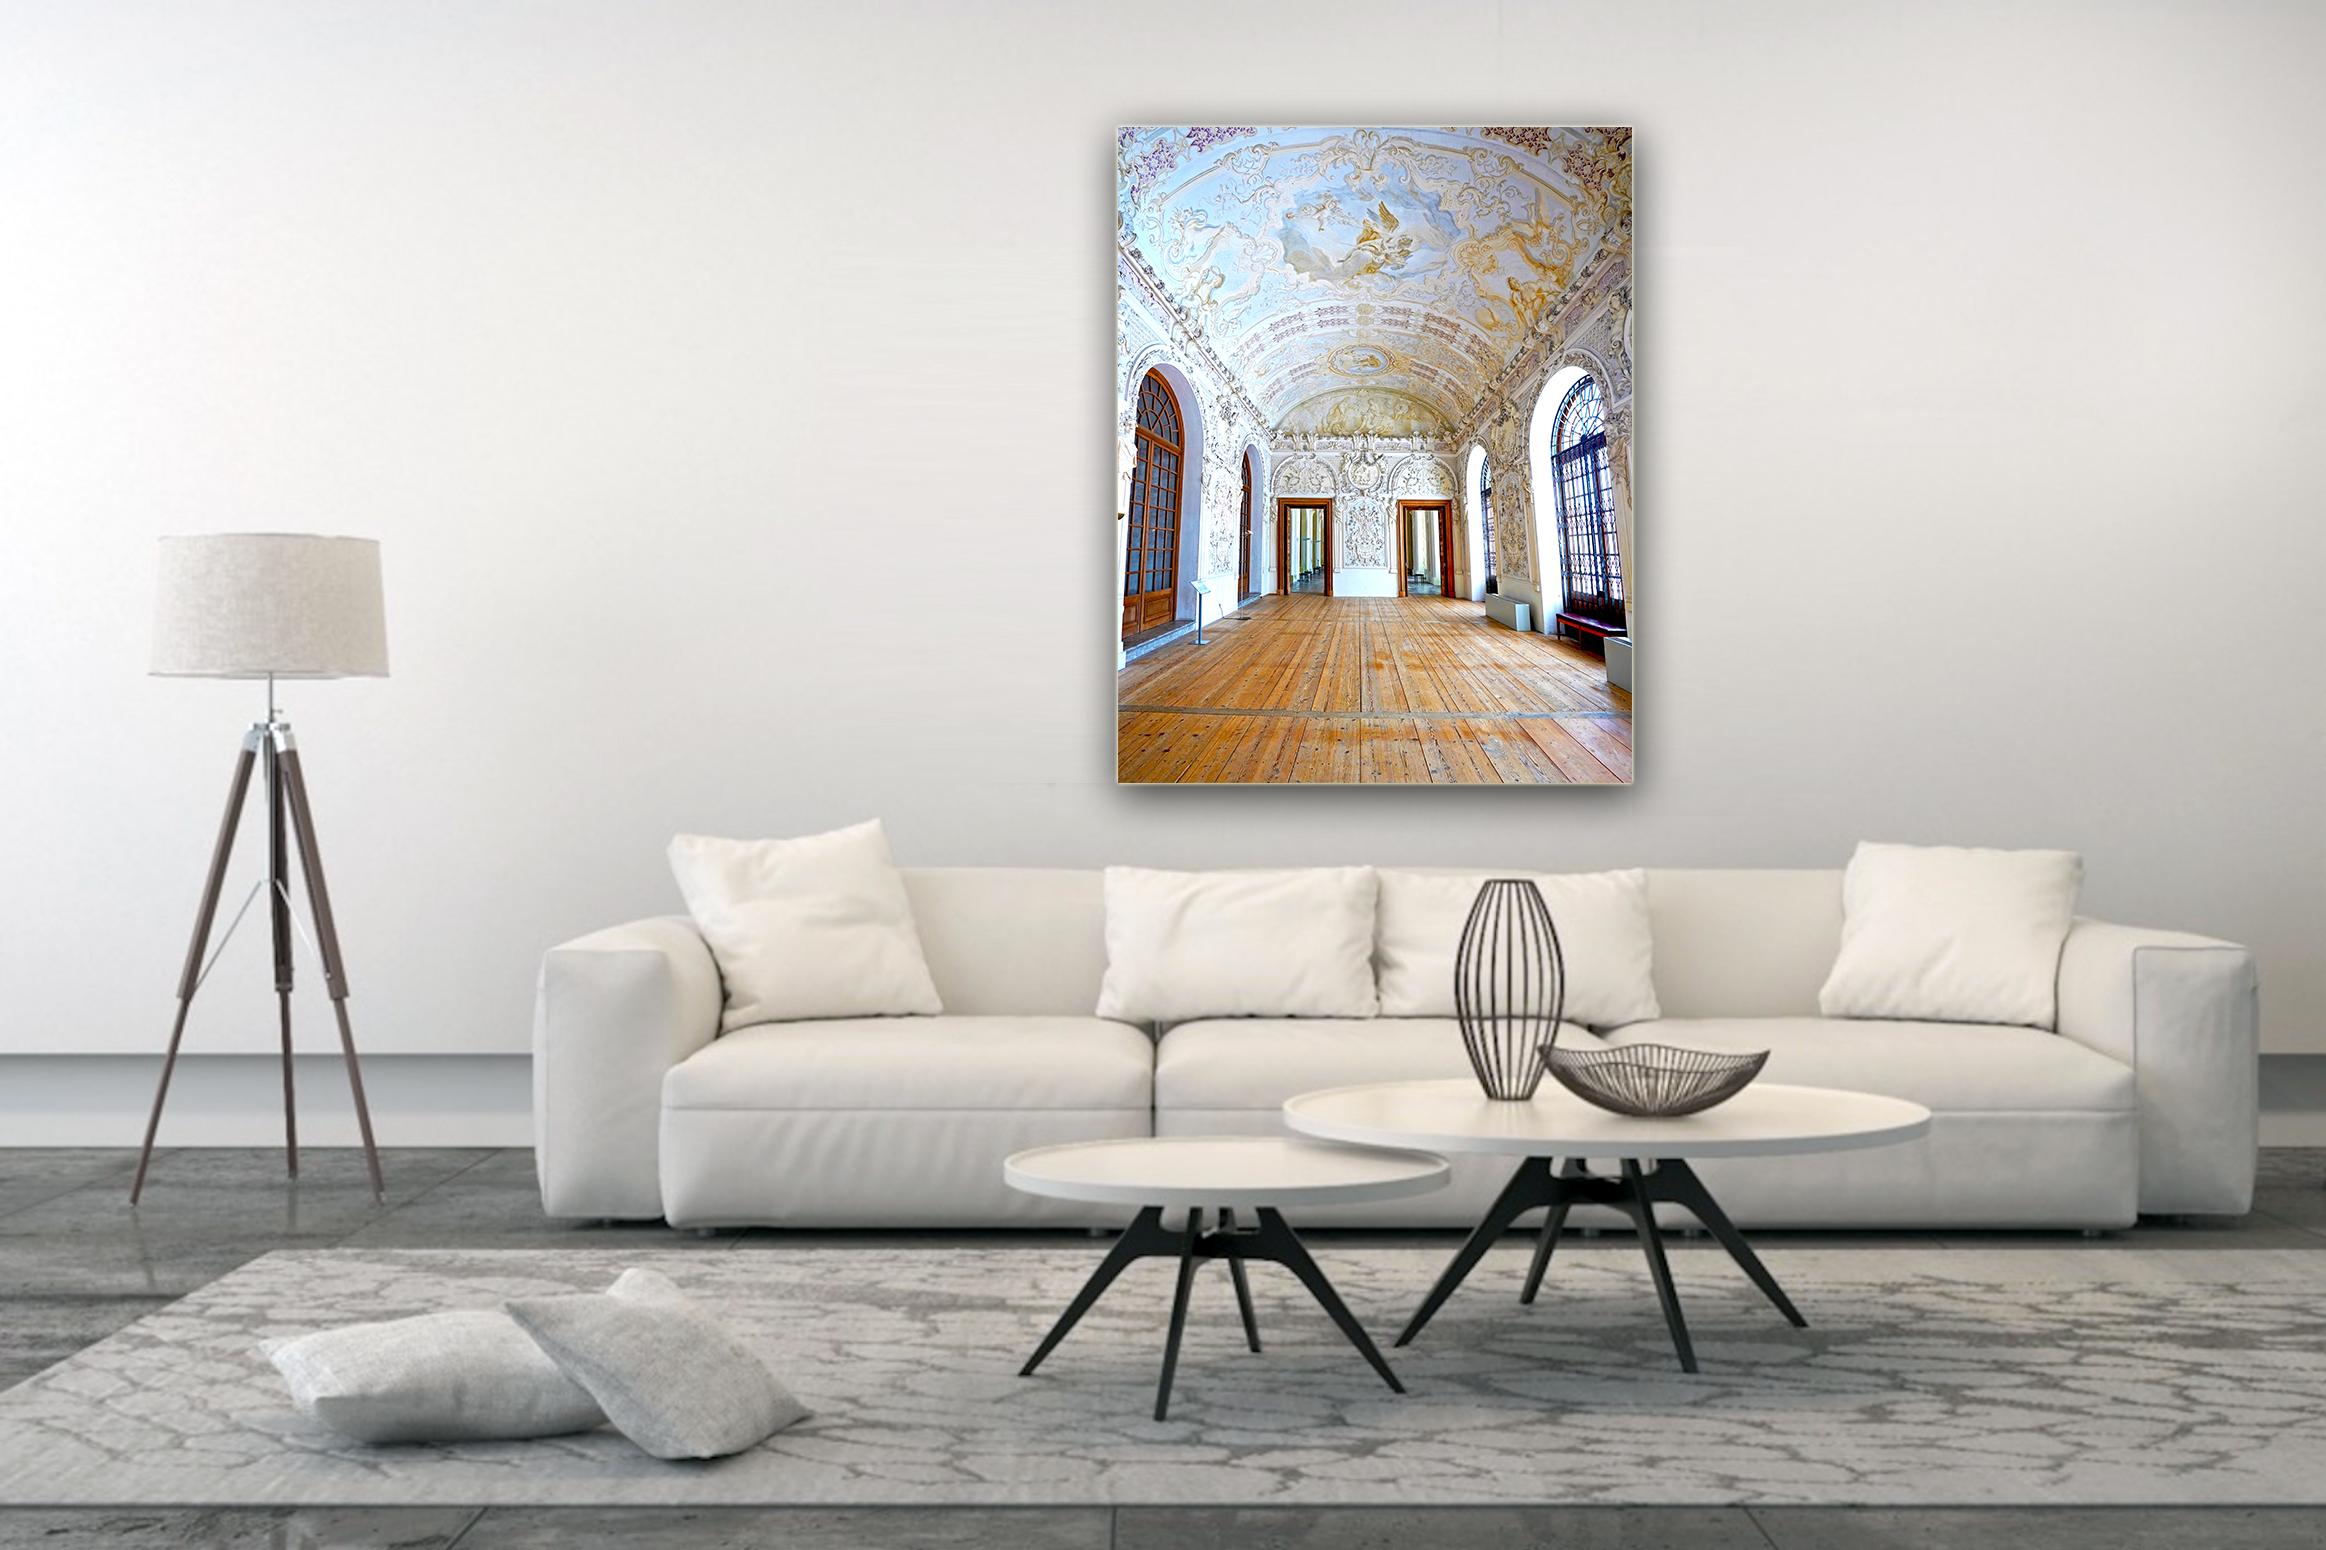 The White Room of Castle Schleissheim is a limited edition photography artwork of 15 originals, printed in high definition as a diasec - backed by an aluminium plate, and printed on Fuji Crystal photopaper and then merged with an acrylic glass, this